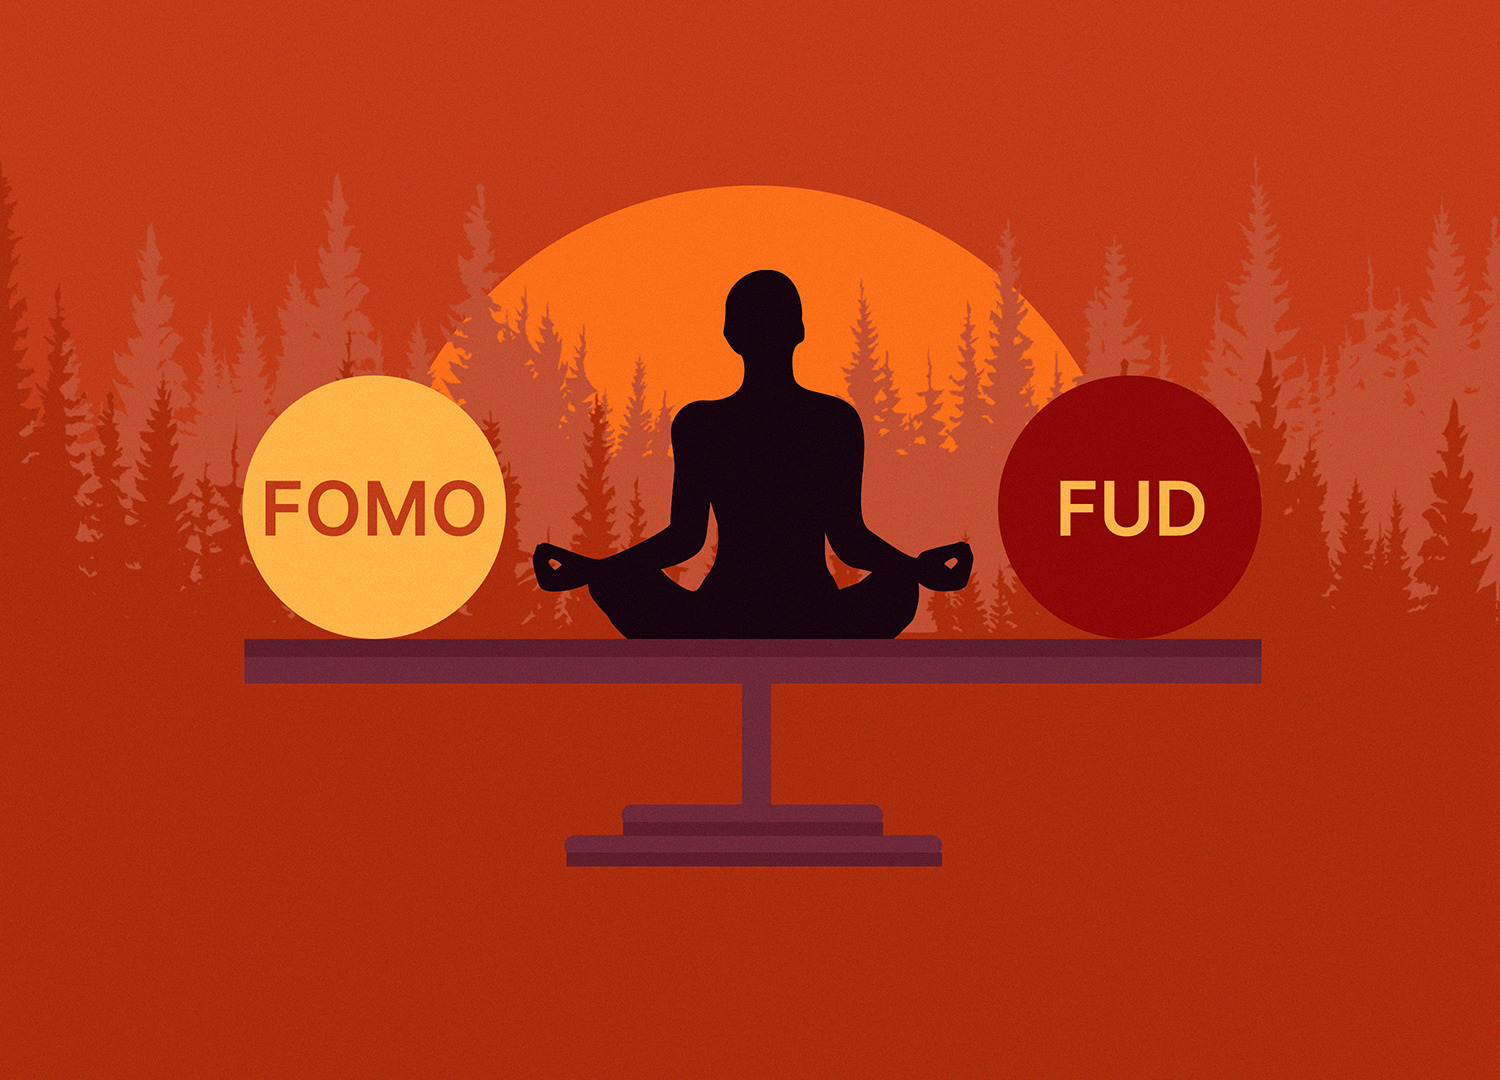 Its time for the crypto world to get over FUD and FOMO